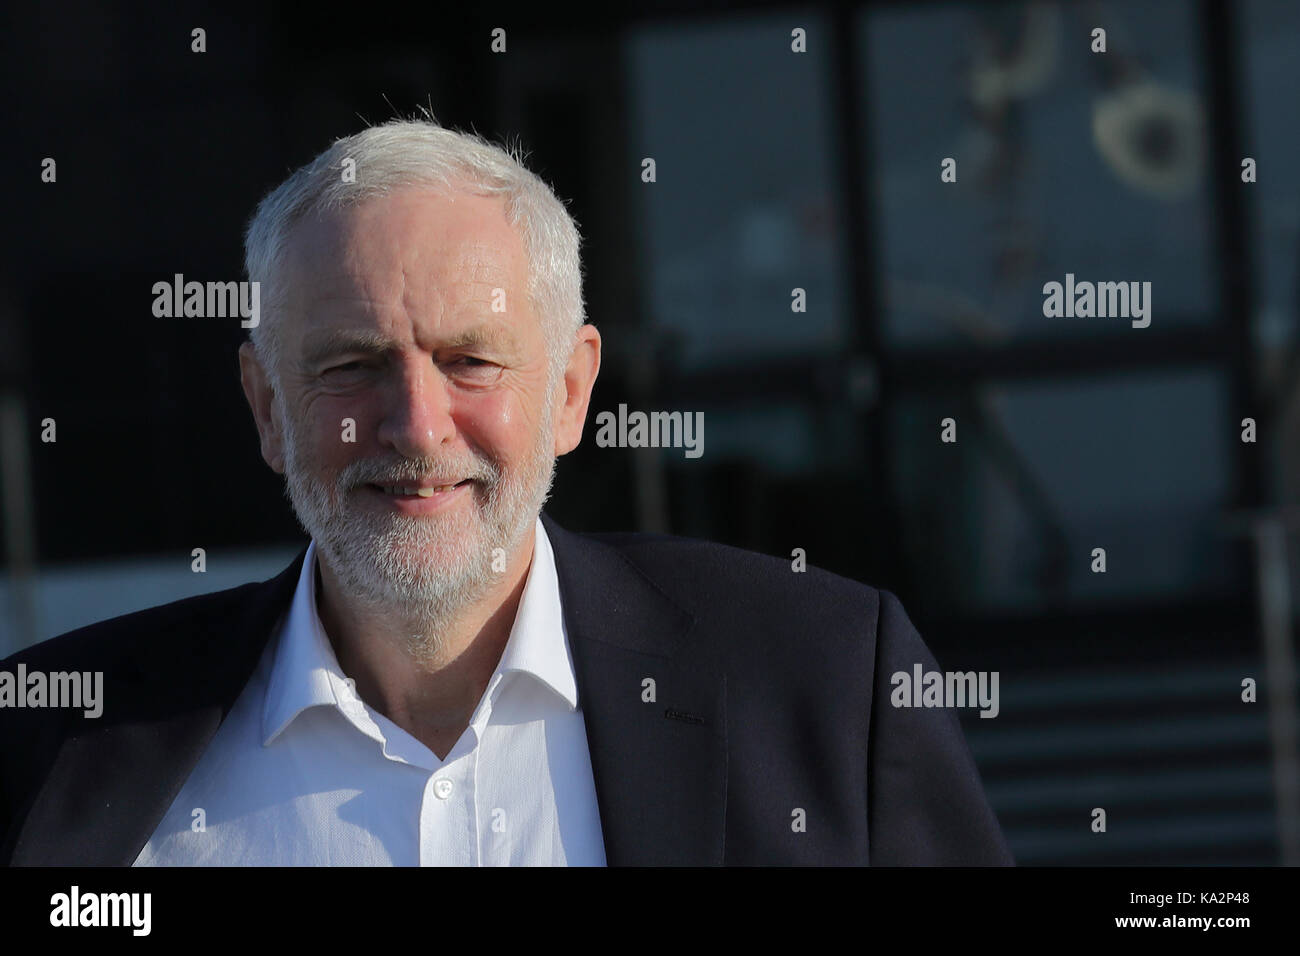 Brighton, UK. 24th September, 2017. Jeremy Corbyn, leader of Britain's opposition Labour party arrives to do an interview for the 'Andrew Marr Show' during the annual Labour Party Conference in Brighton, UK Sunday, September 24, 2017. Photograph : Credit: Luke MacGregor/Alamy Live News Stock Photo